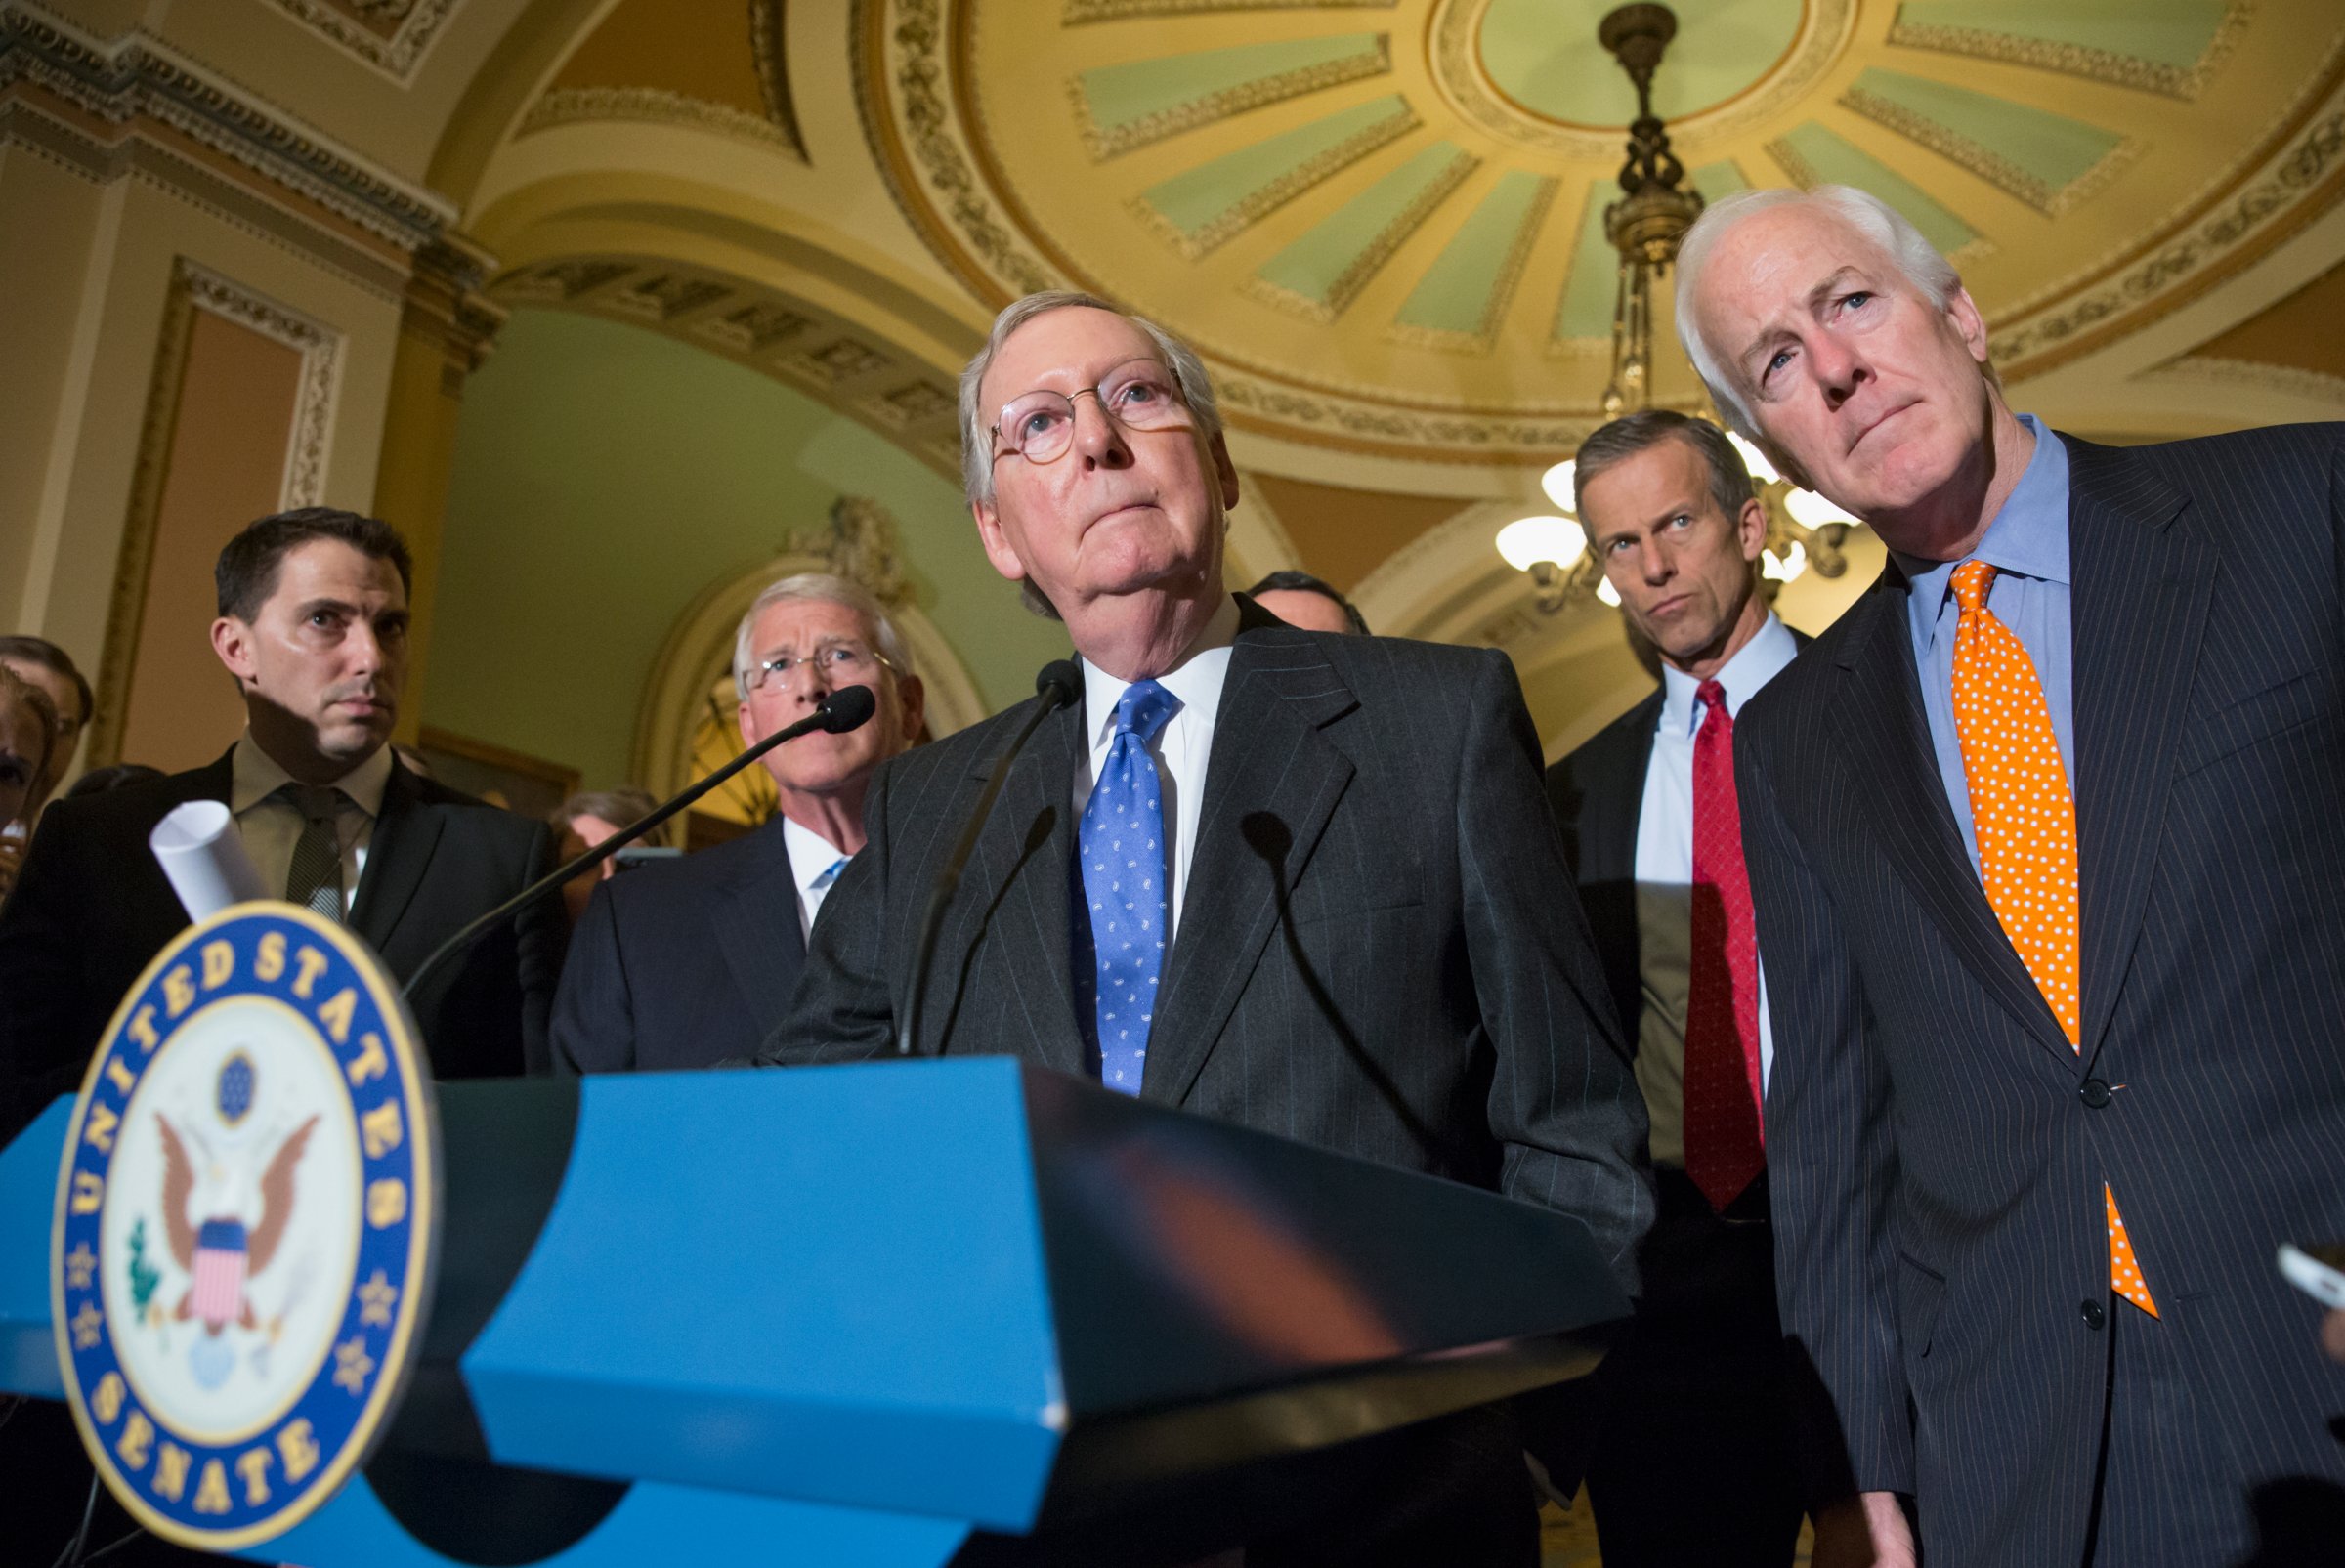 Mitch McConnell, center, speaks with reporters on Capitol Hill in Washington, D.C. on Feb. 23, 2016.